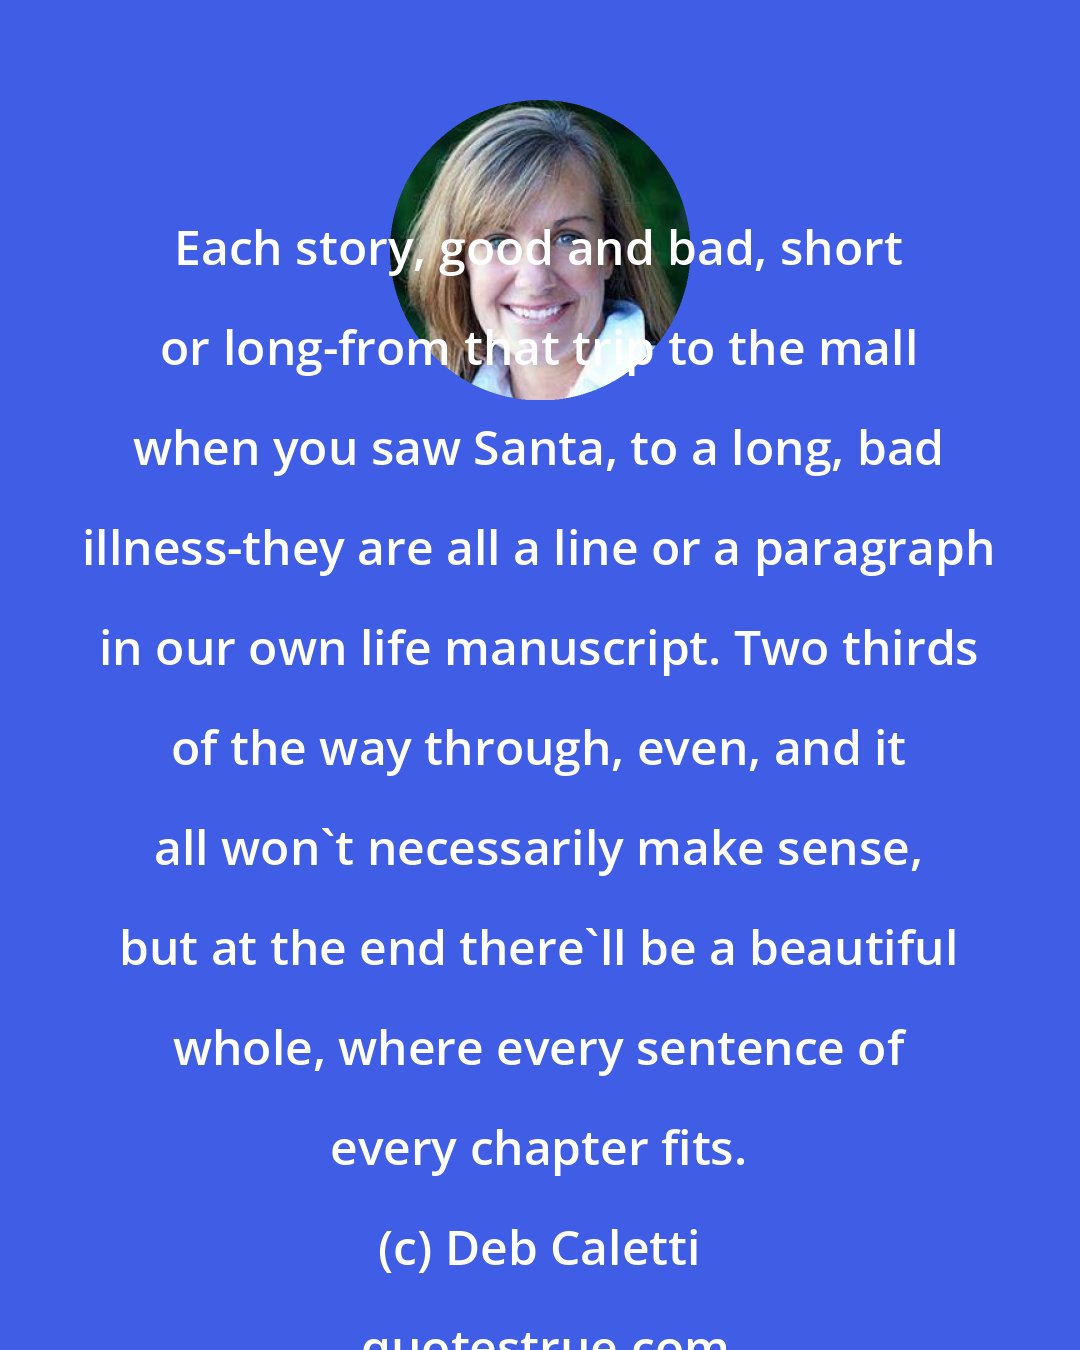 Deb Caletti: Each story, good and bad, short or long-from that trip to the mall when you saw Santa, to a long, bad illness-they are all a line or a paragraph in our own life manuscript. Two thirds of the way through, even, and it all won't necessarily make sense, but at the end there'll be a beautiful whole, where every sentence of every chapter fits.